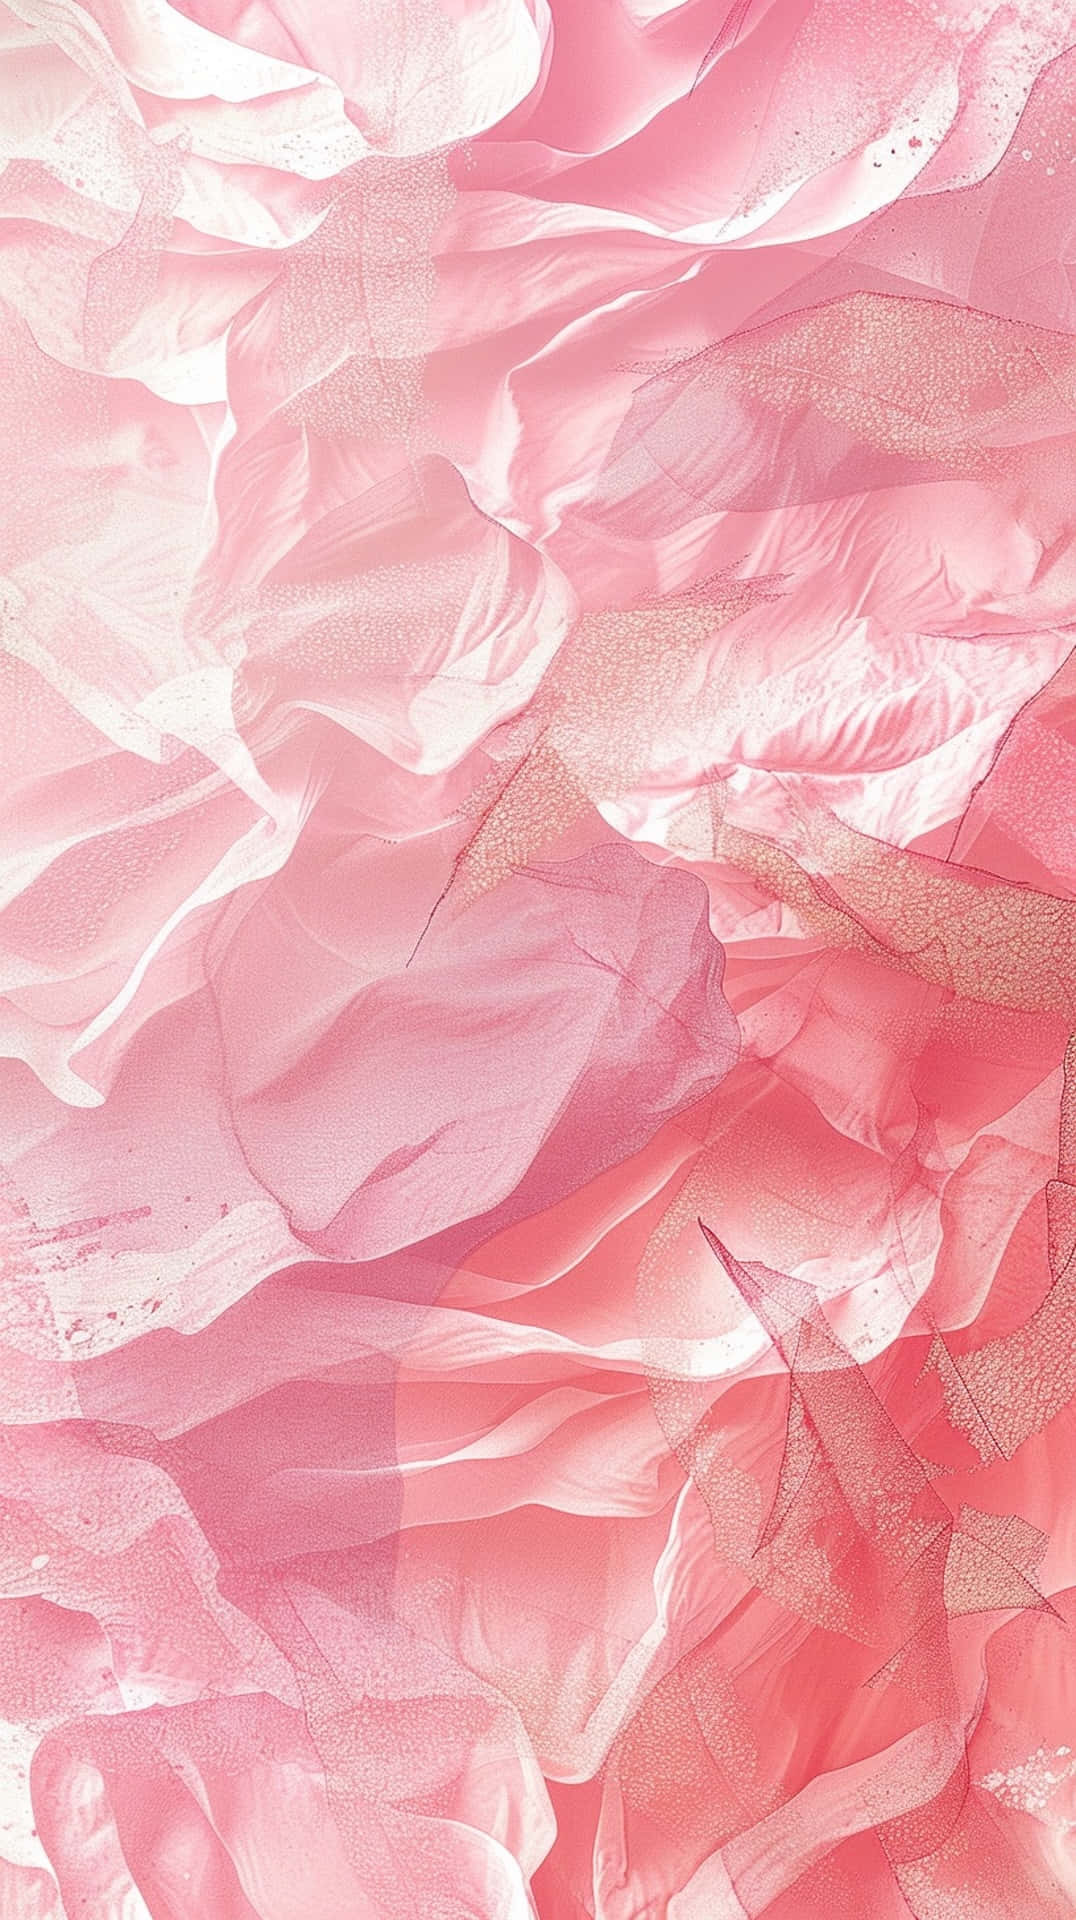 Abstract Pink Fabric Waves Wallpaper